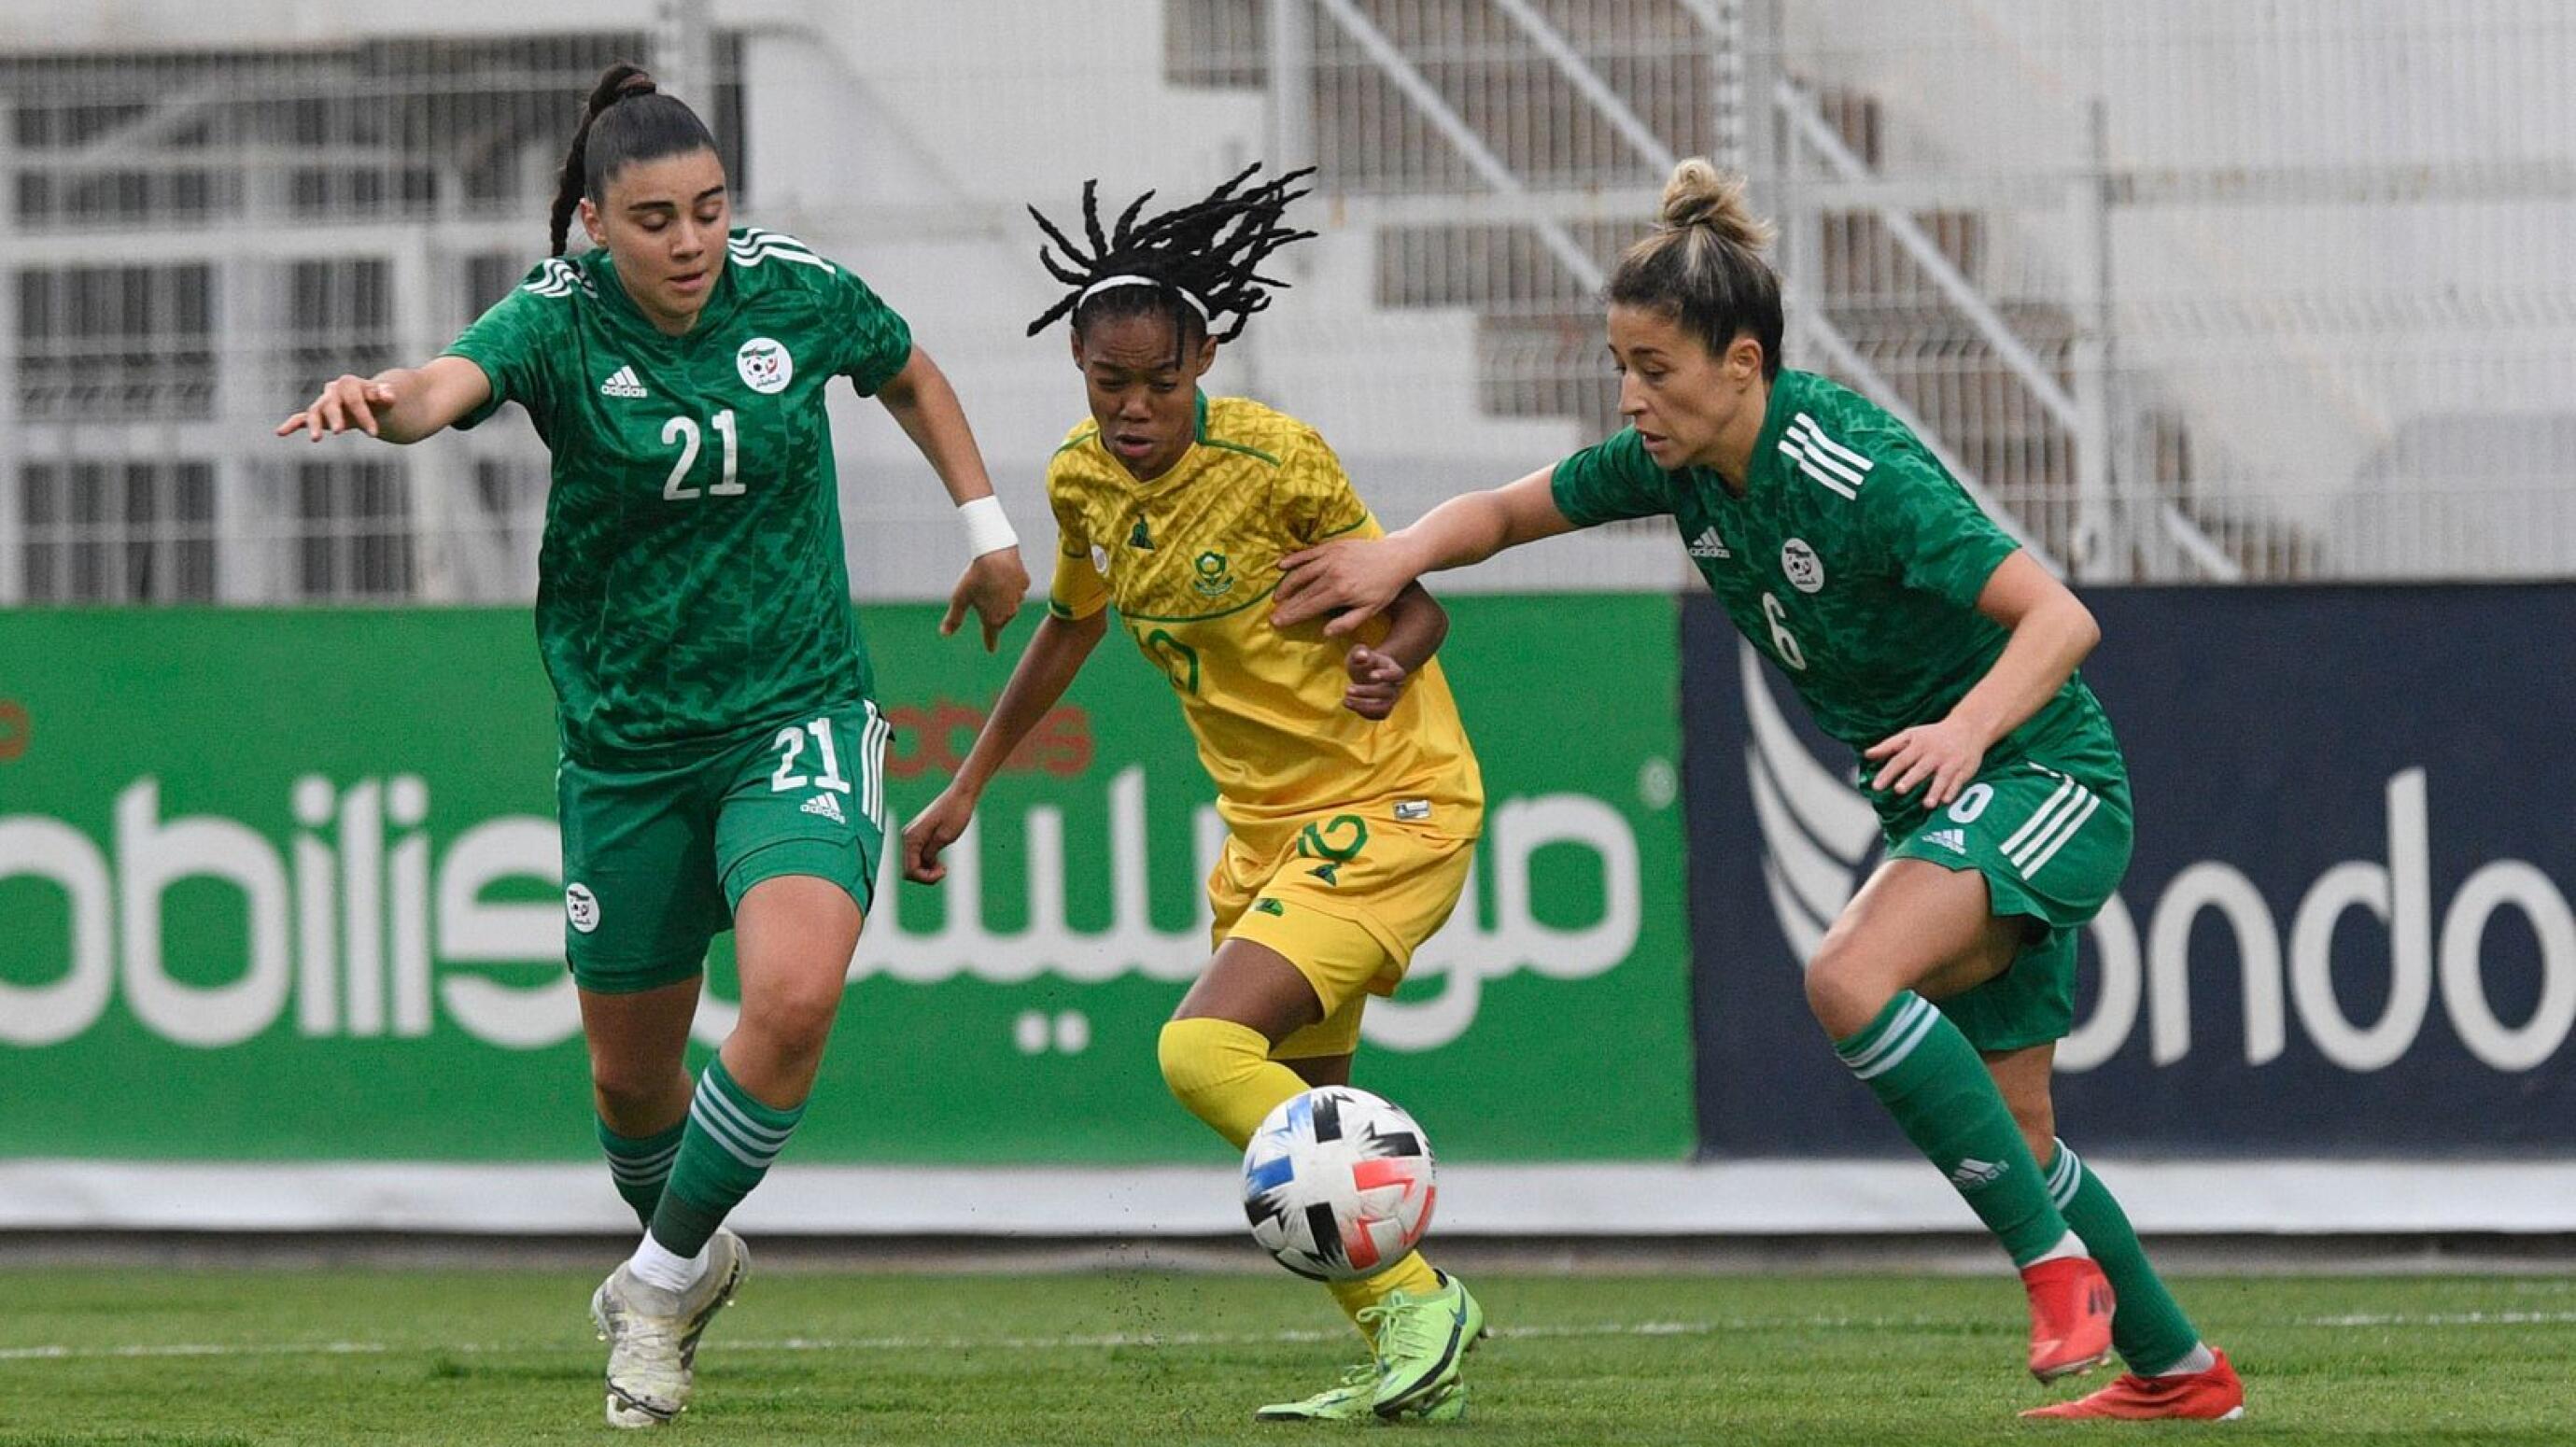 Linda Mothlalo of South Africa challenges Lydia Belkacemi of Algeria during their Africa Women Cup of Nations qualifier at Omar Hamadi Stadium in Algeria on Wednesday